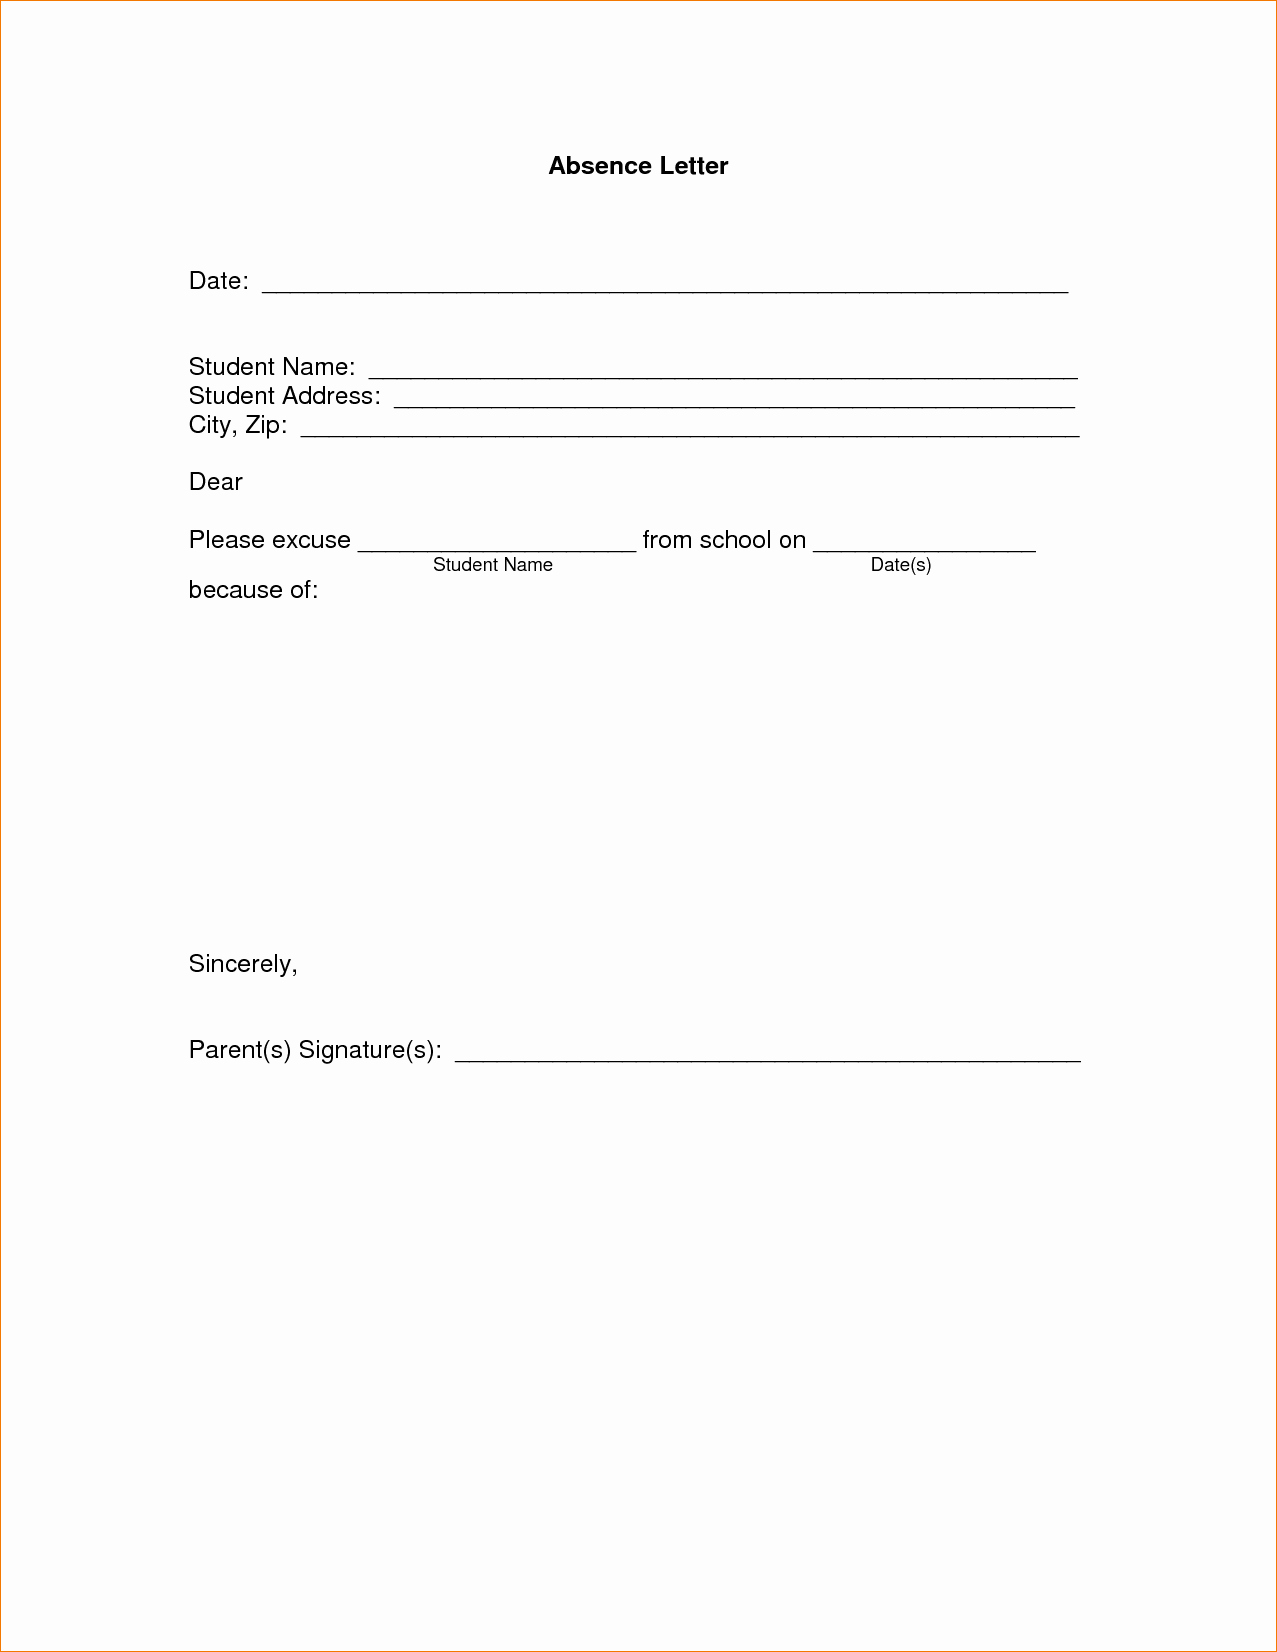 Excuse Absence Letter for School Luxury 11 Absence Excuse Letteragenda Template Sample